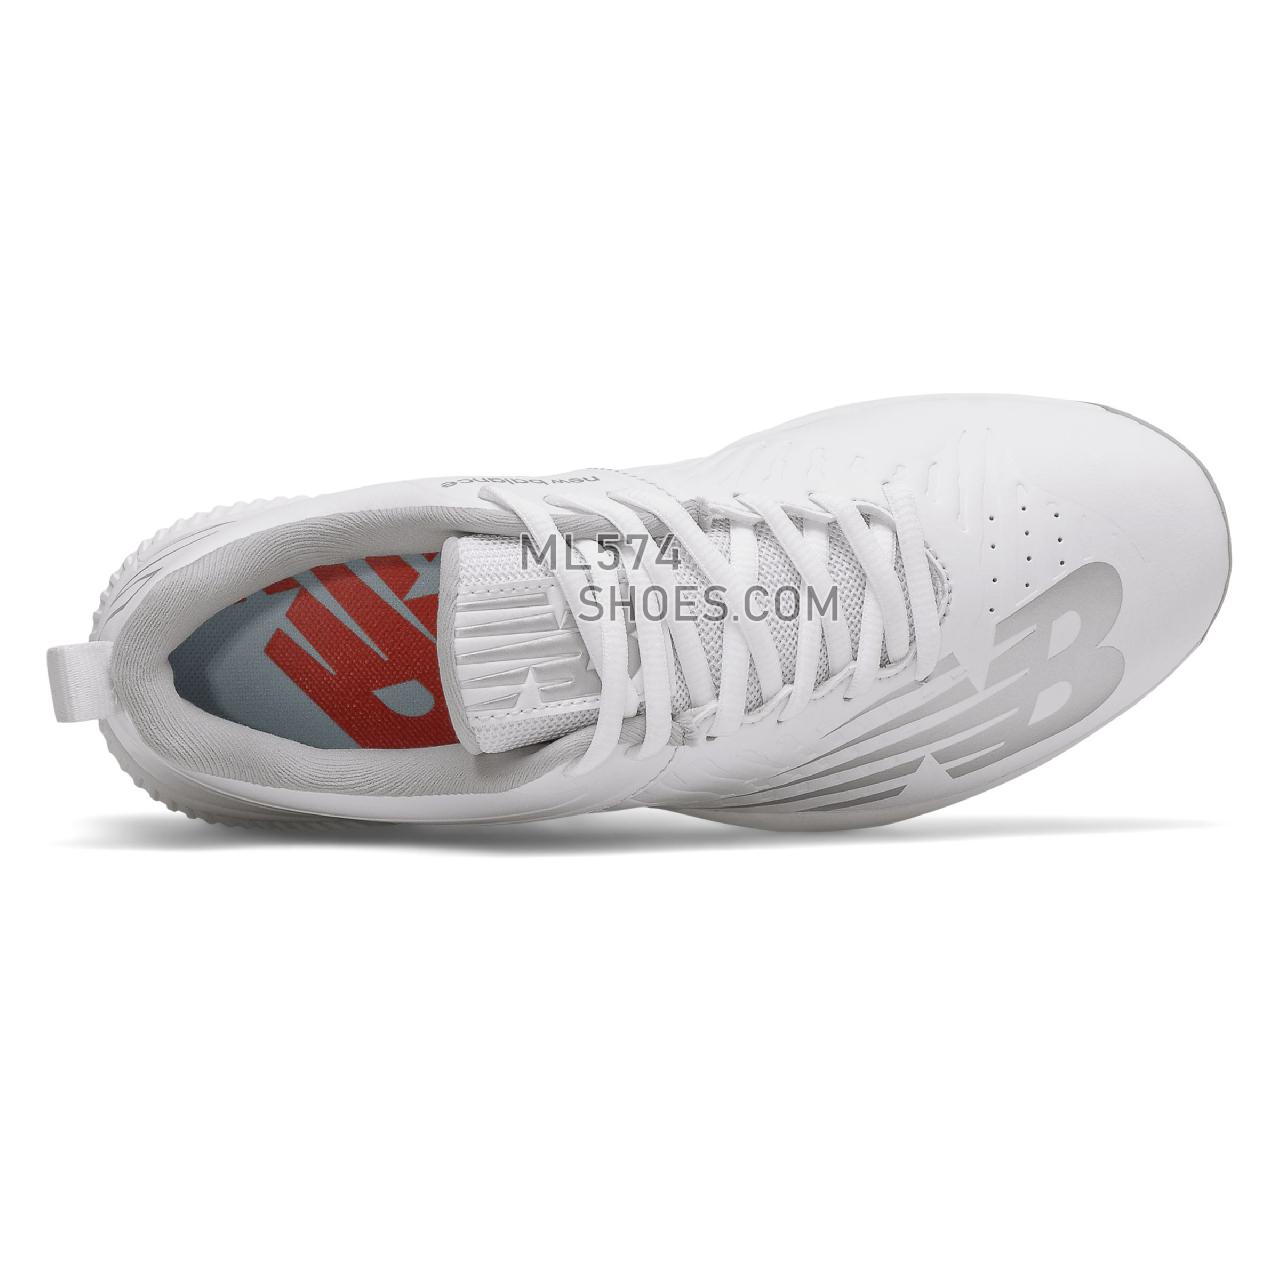 New Balance FuelCell SMFUSEv3 - Women's Softball - White - SMFUSEW3